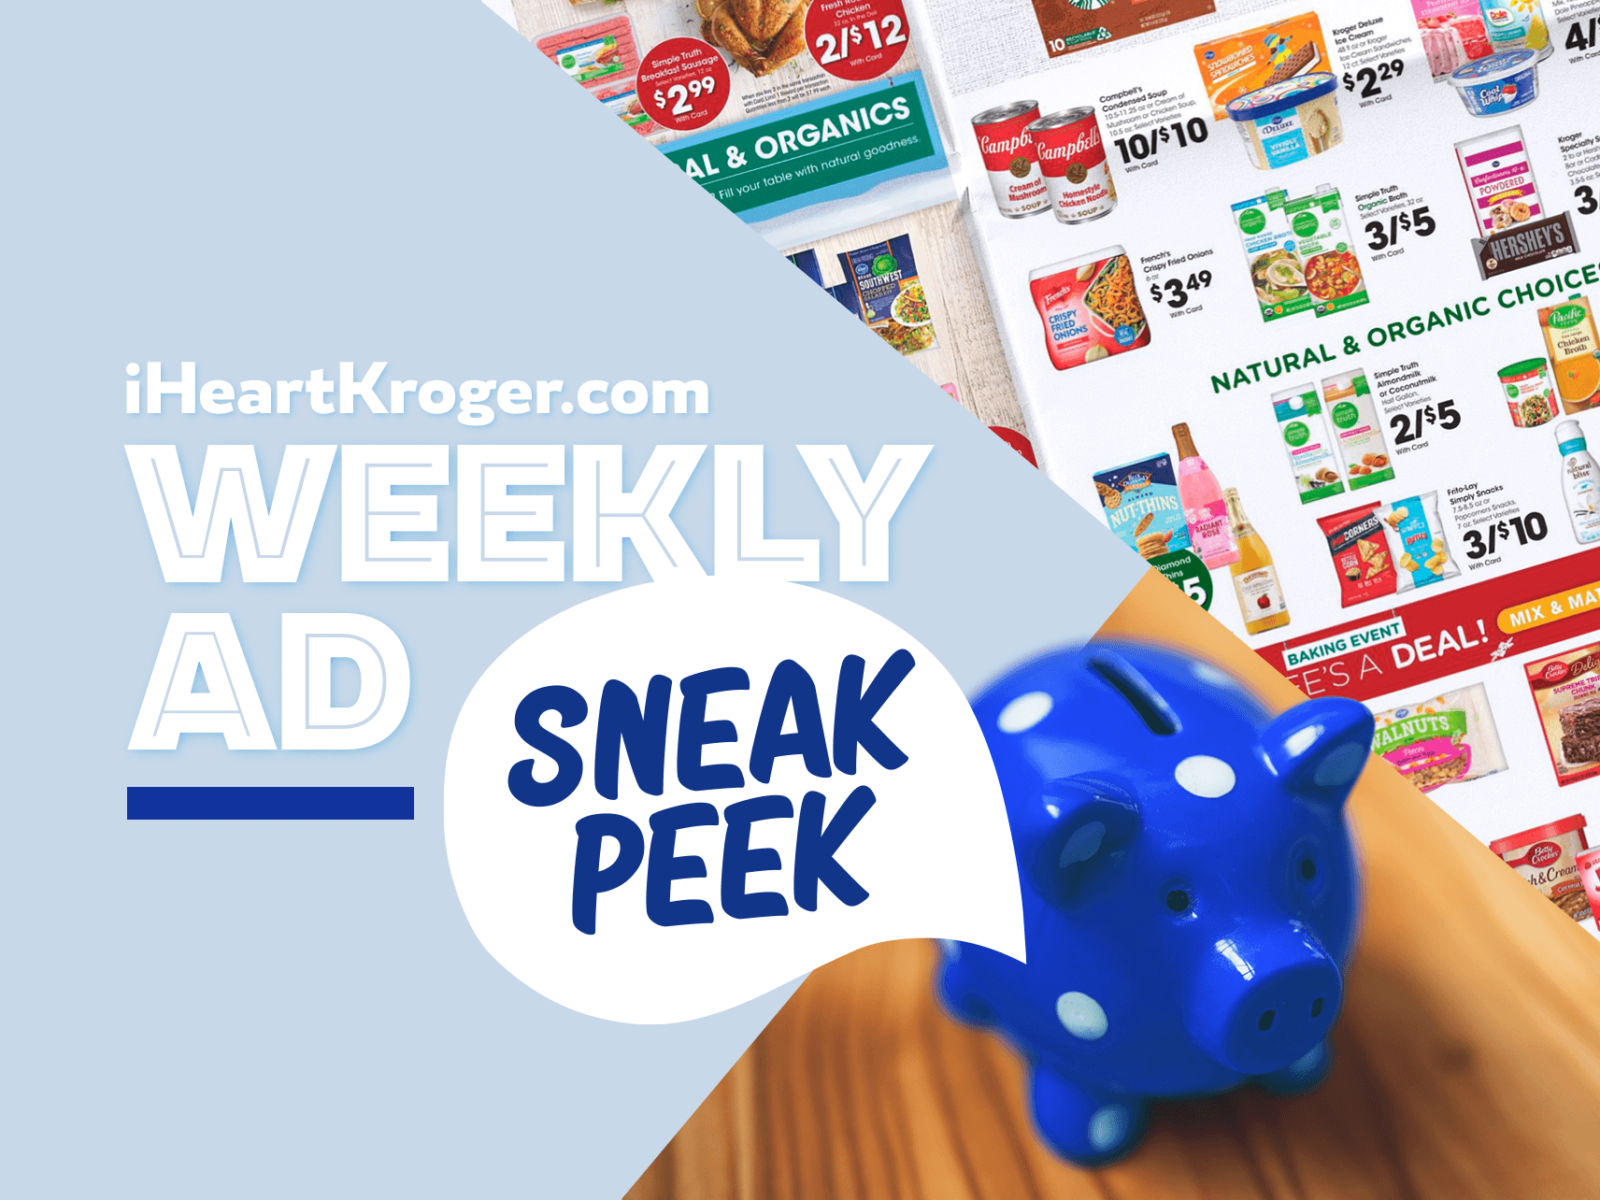 Kroger Ad & Coupons Week Of 6/19 to 6/25 – Mega Sale Continues!